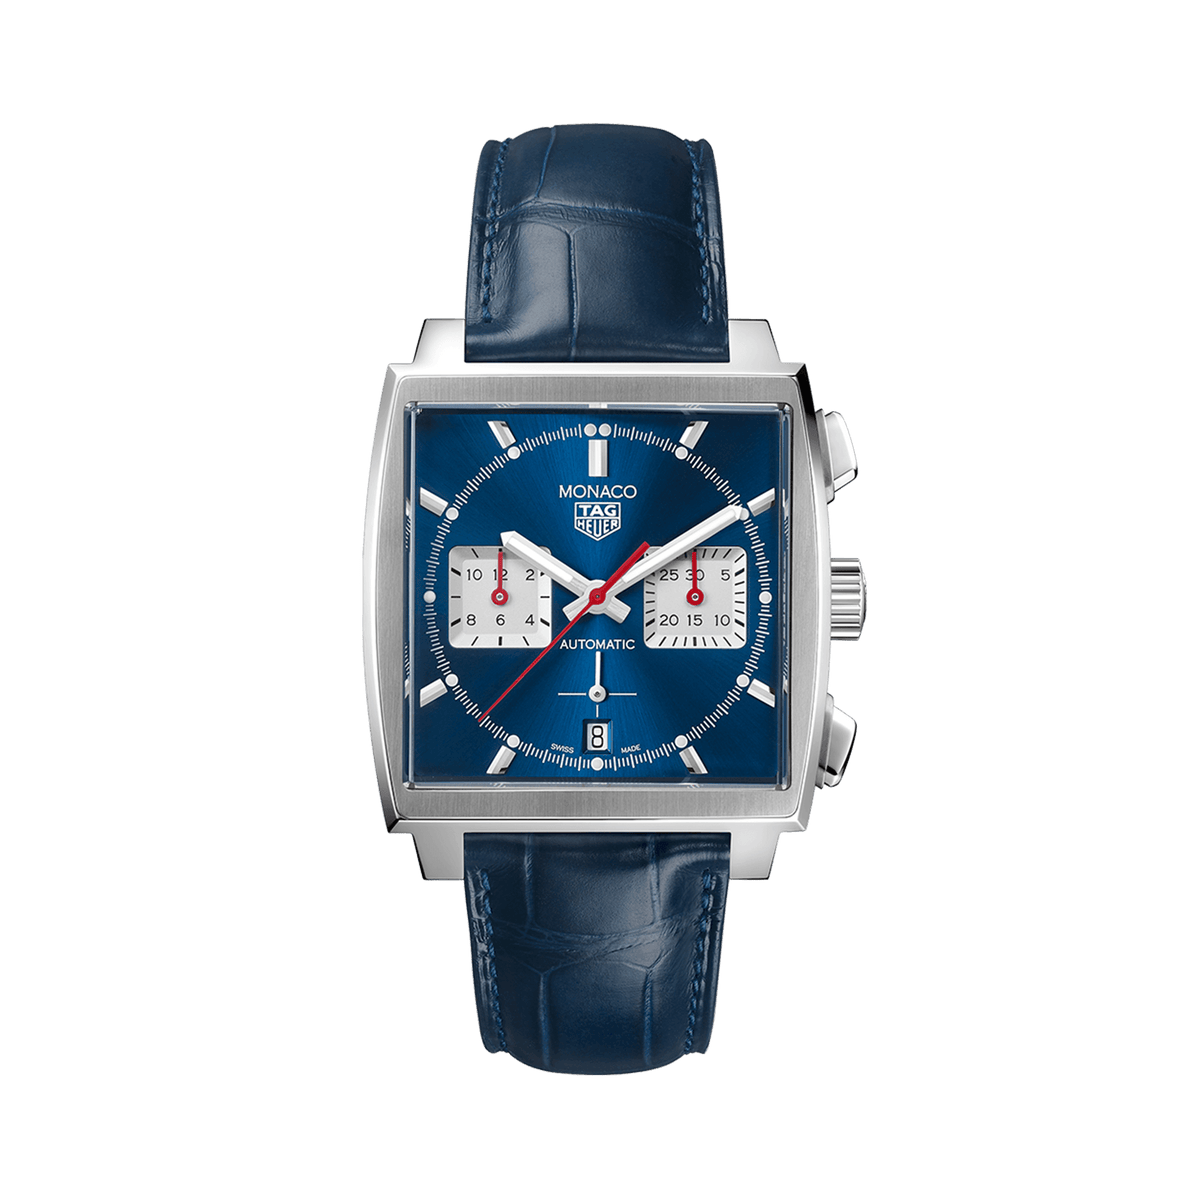 TAG Heuer Monaco Men's 39mm Stainless Steel Automatic Chronograph Watch CBL2111.FC6453 - Wallace Bishop